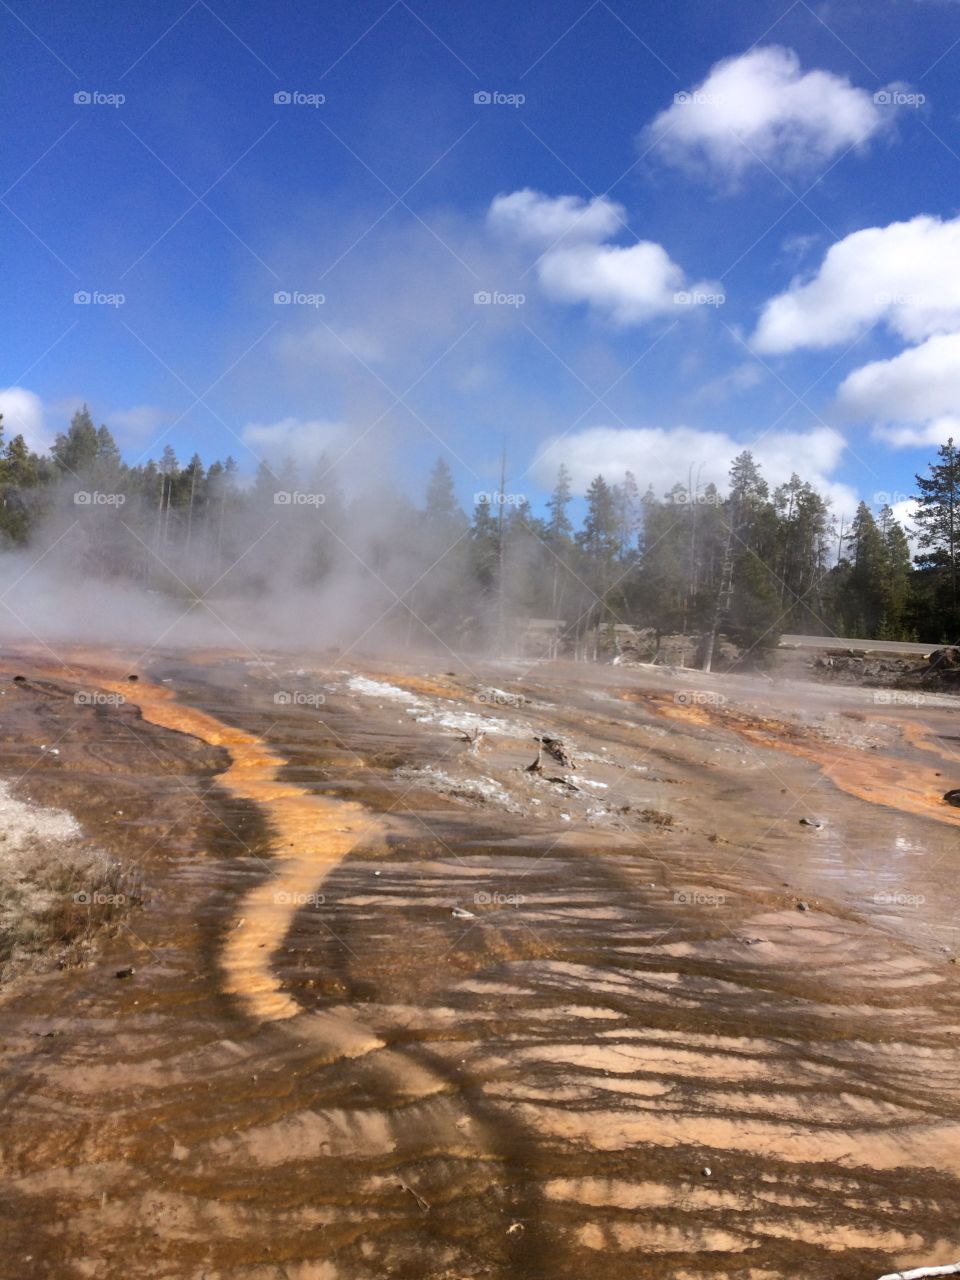 The lands and geothermal features of Yellowstone National Park 